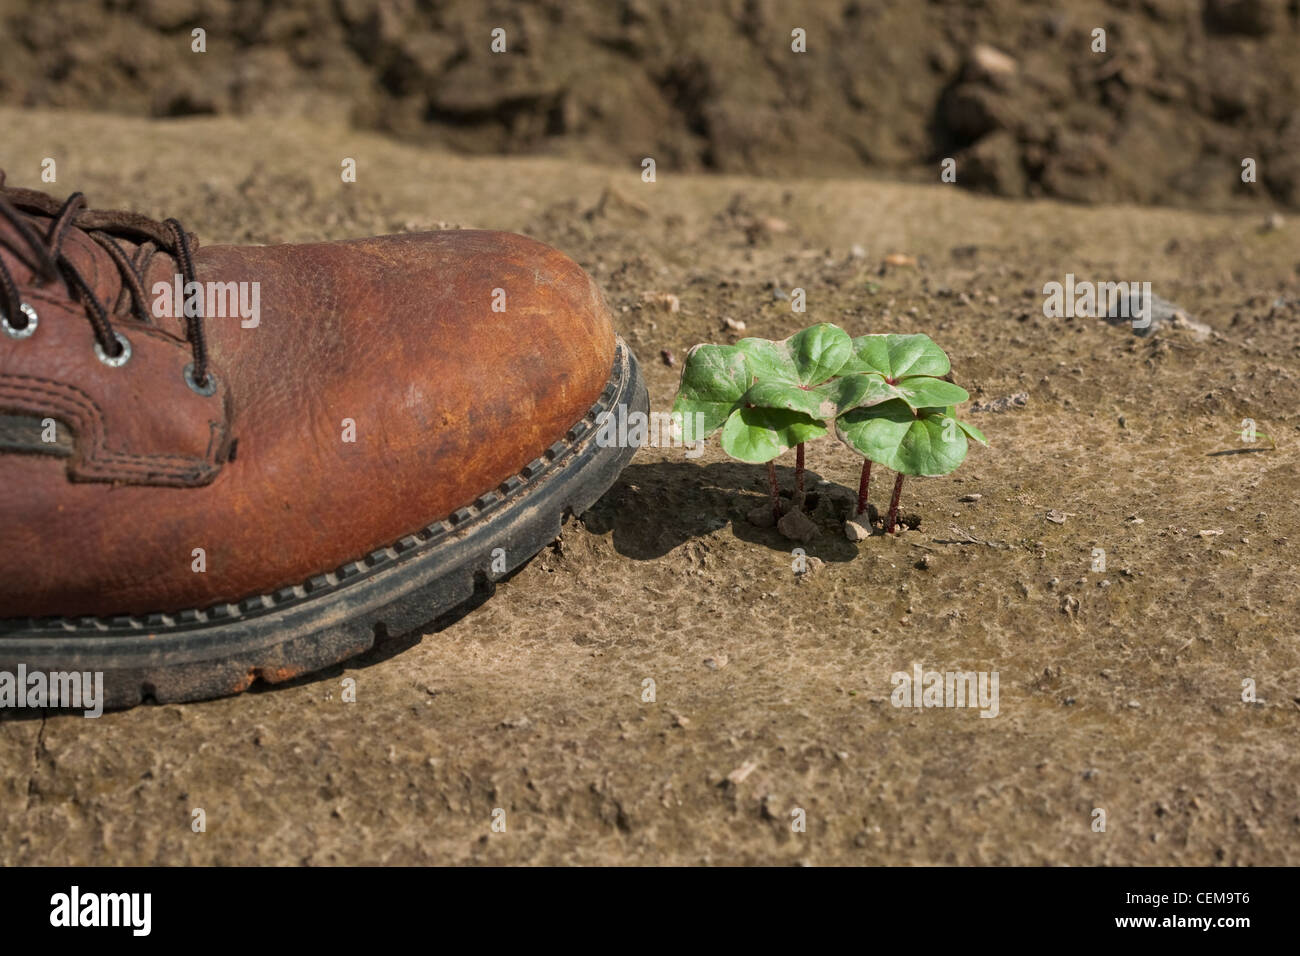 Agriculture - The toe of a farmers (growers) boot next to cotton seedlings in the field / near England, Arkansas, USA. Stock Photo